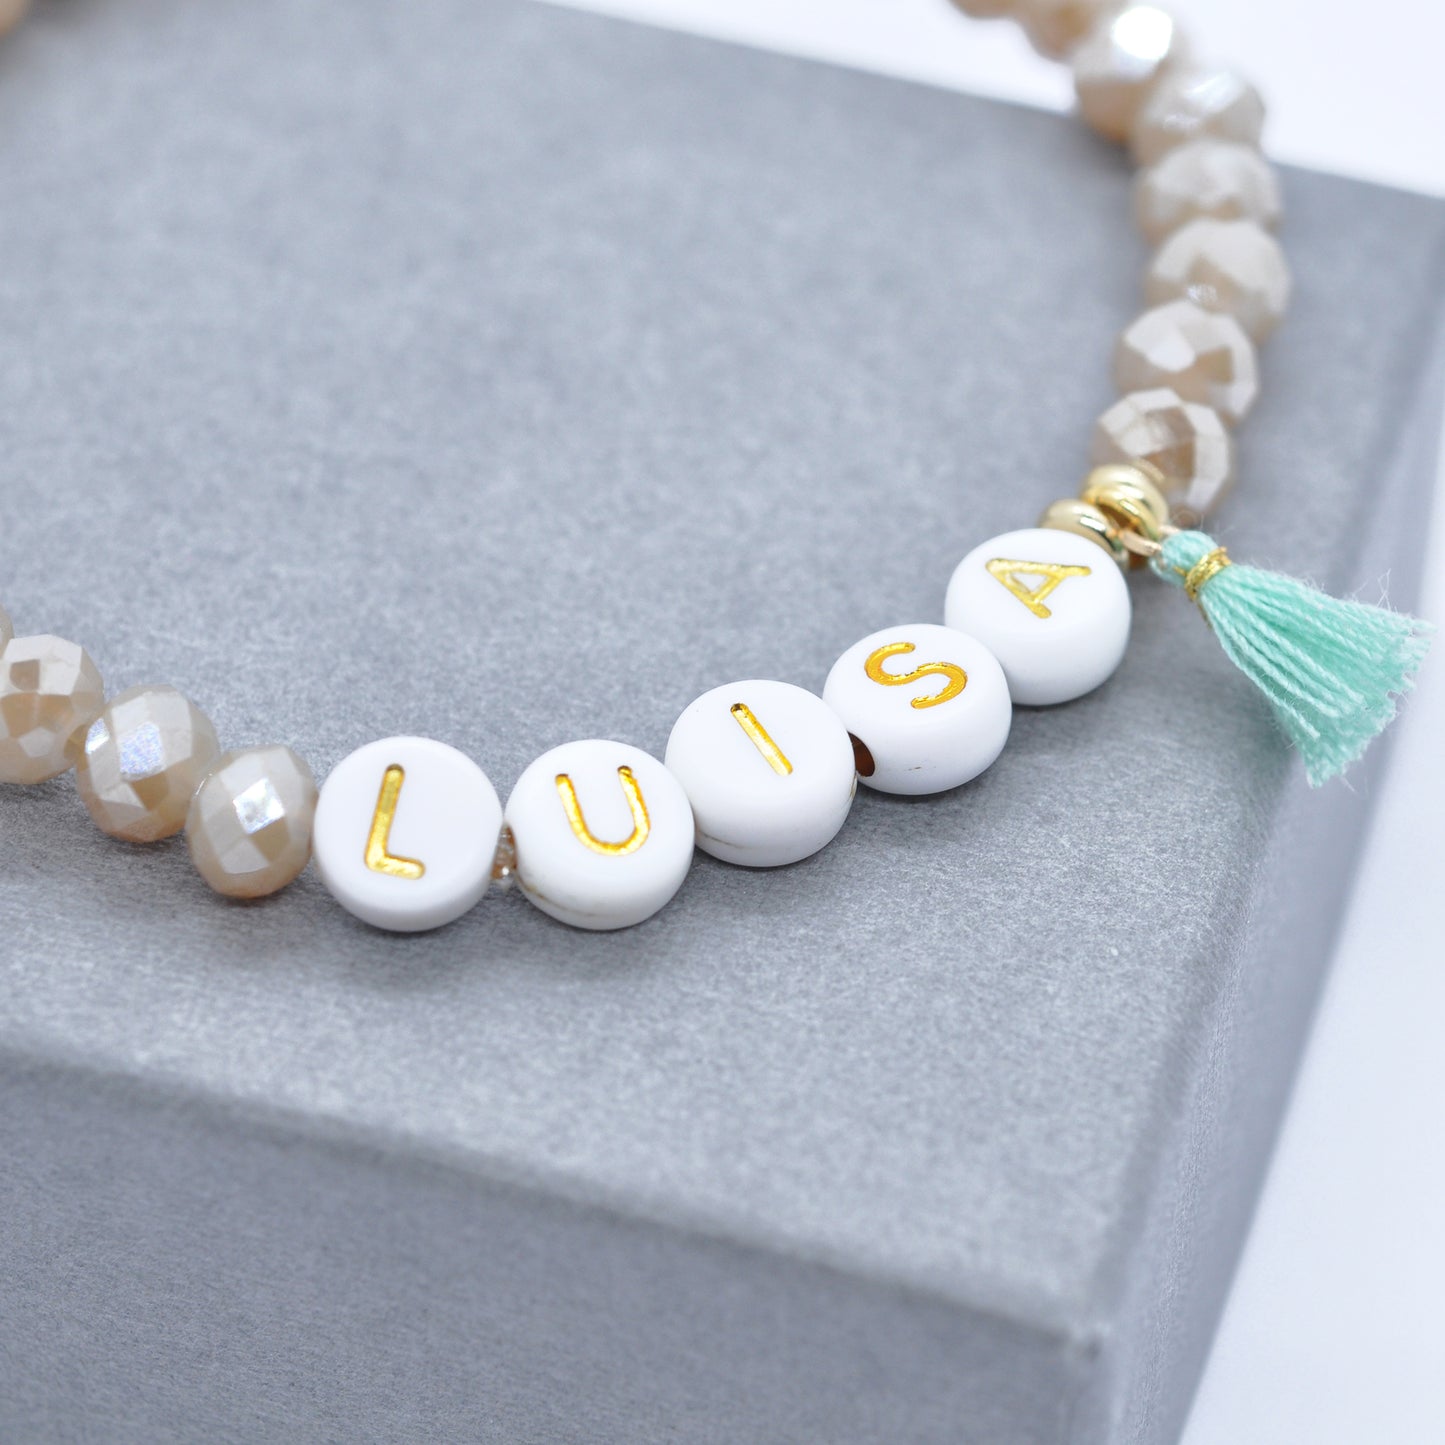 Personalized name bracelet made of briolette - letters white gold with tassel mint